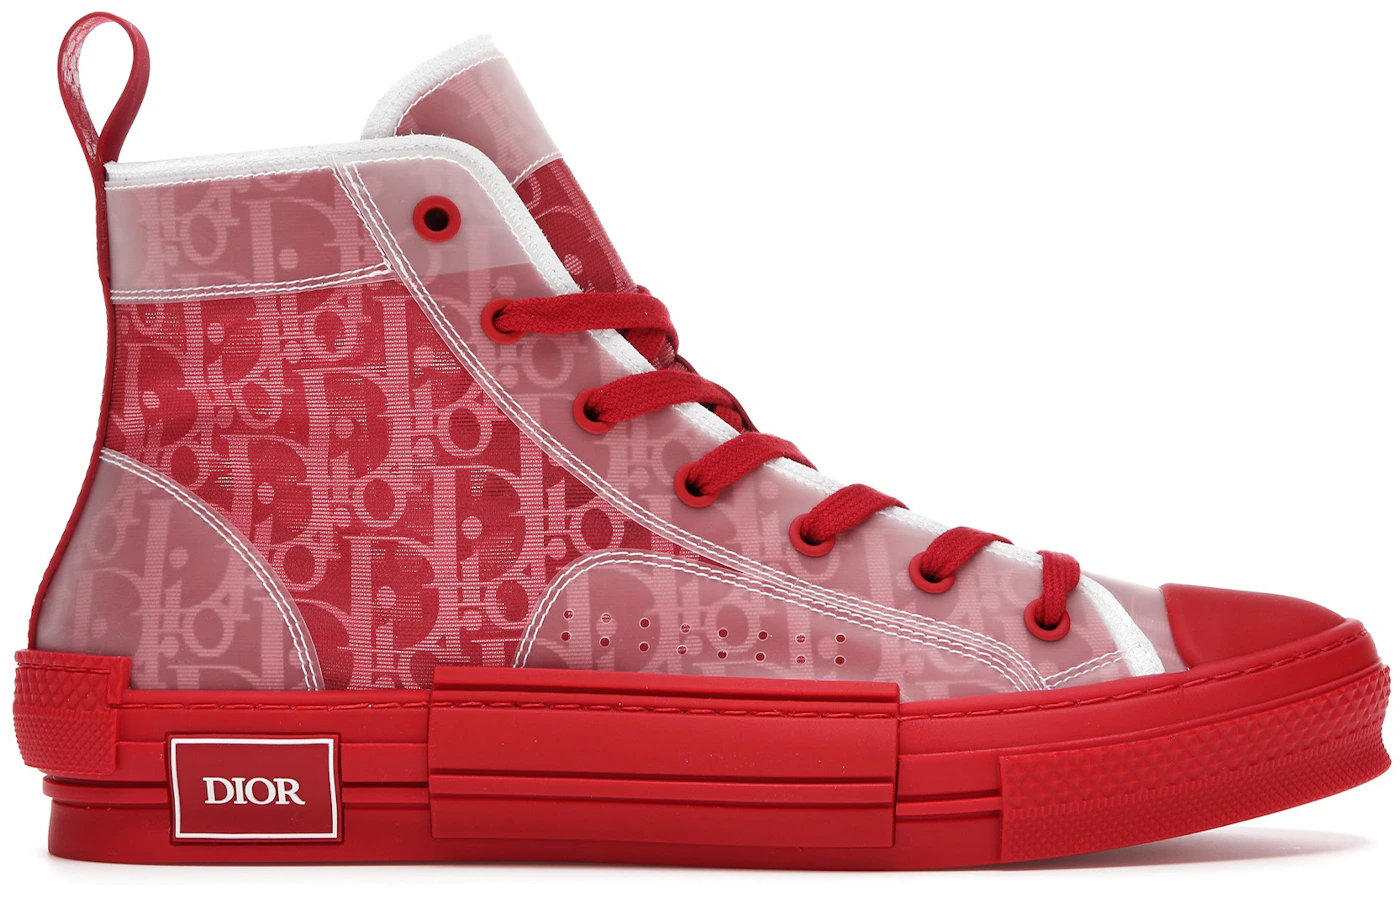 the $1000 converse style sneaker regret: dior b23 high-top sneaker